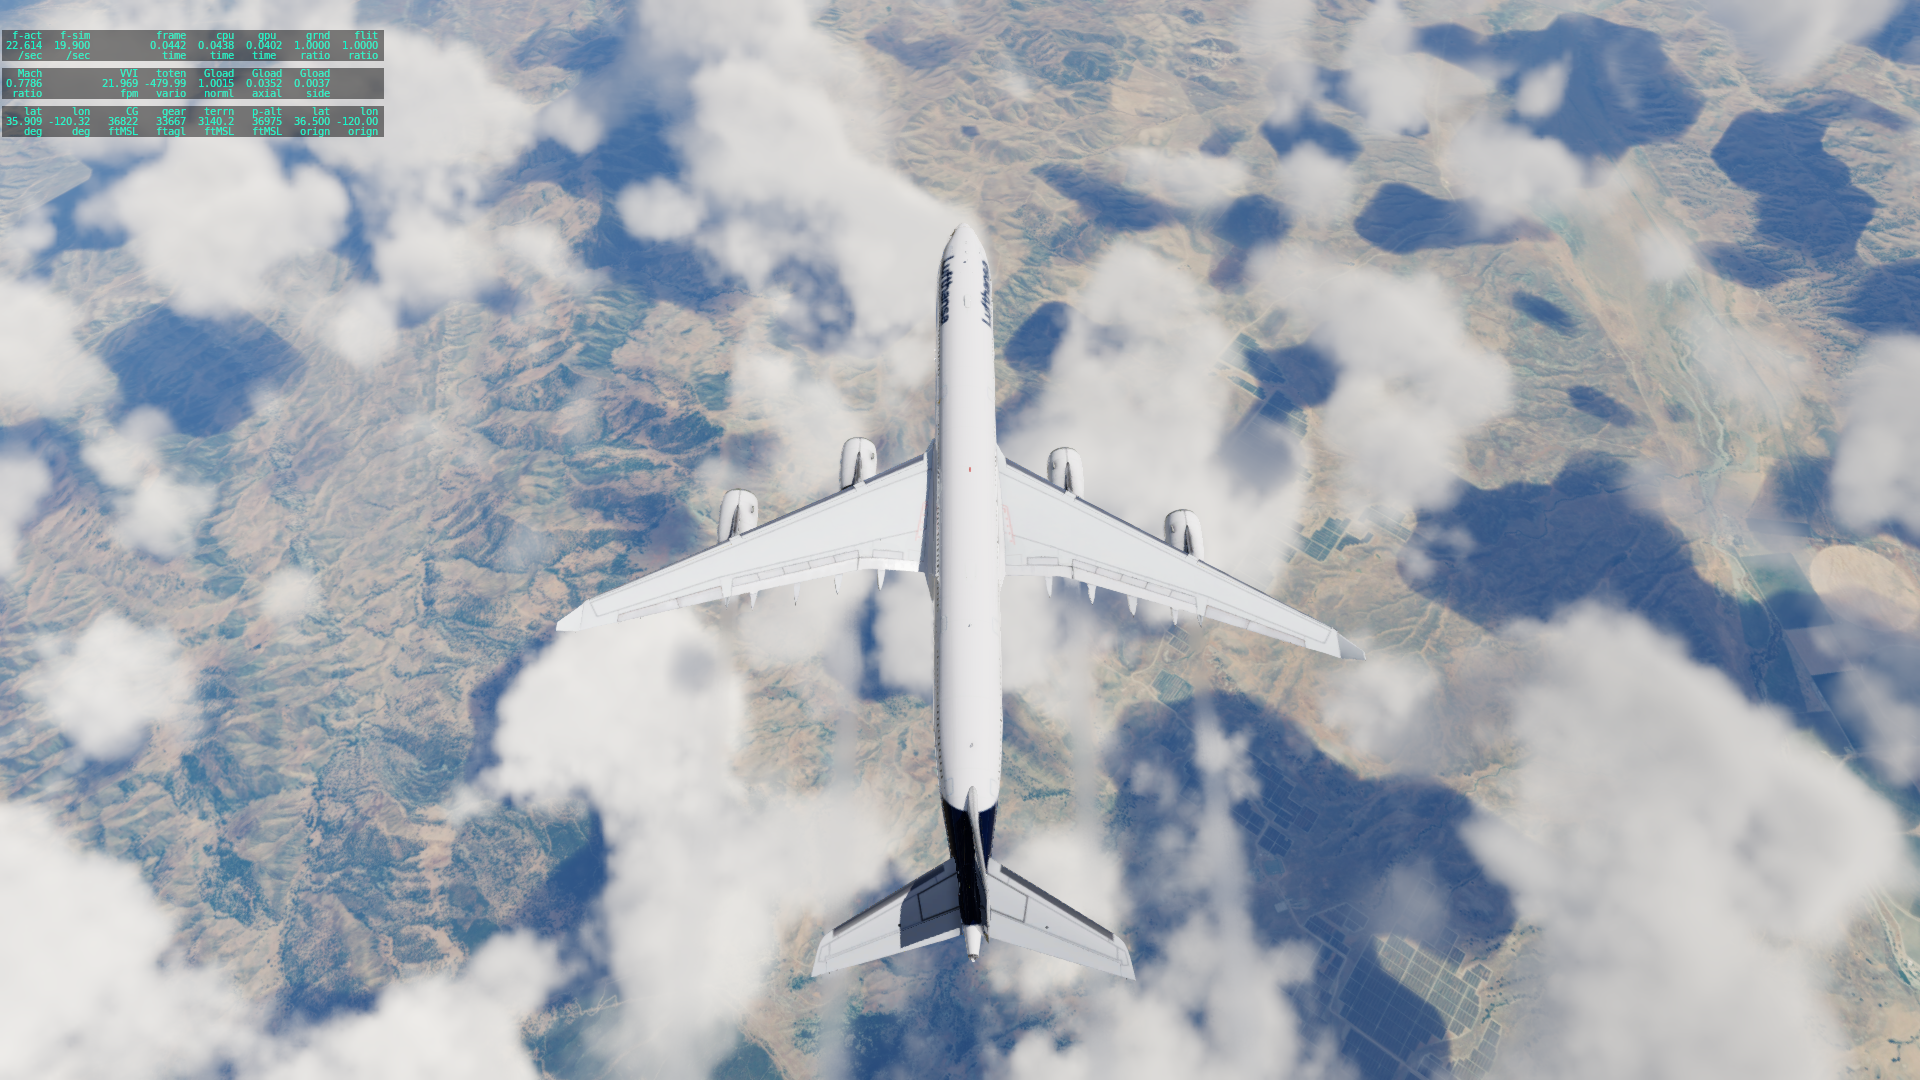 A X-Plane 12 Toliss A340-600 in Lufthansa livery (mostly white with a blue tail and logo at the body) flying south of Pinnacles NP, where orthophotography has hilly terrain and farm land. There’s scattered clouds below the aircraft casting some shadows.